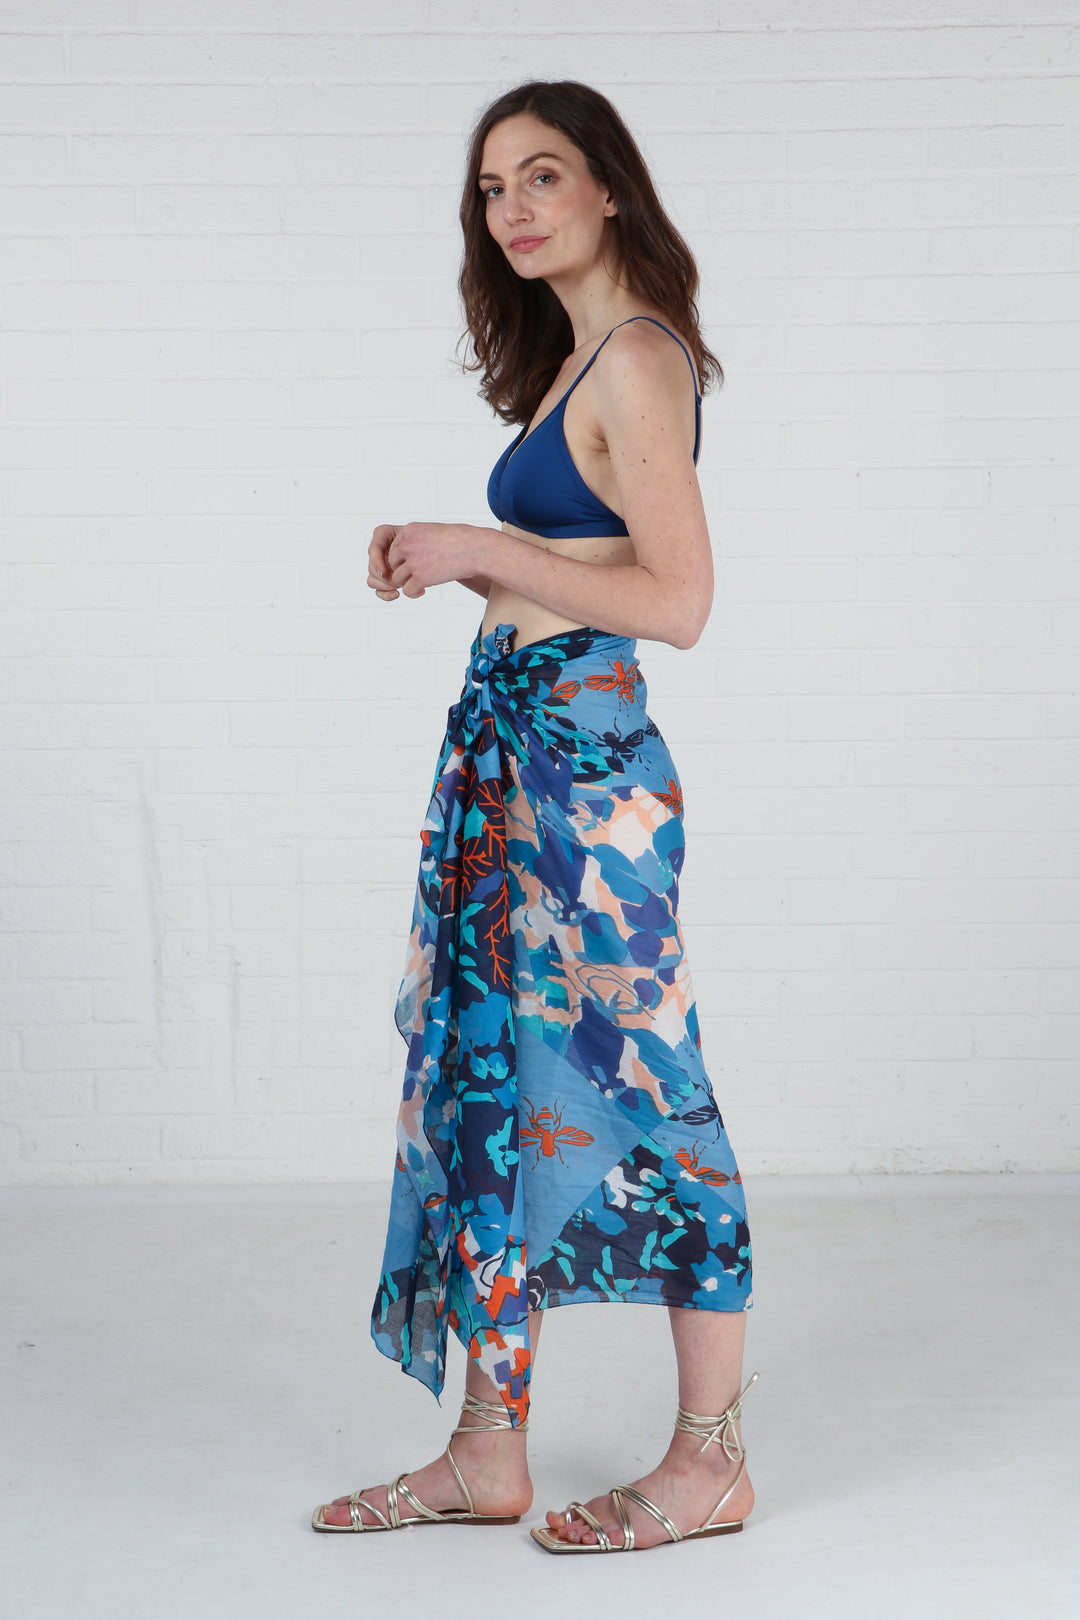 model wearing a blue floral bee print scarf tied around the waist to show it being worn as a beach cover up sarong